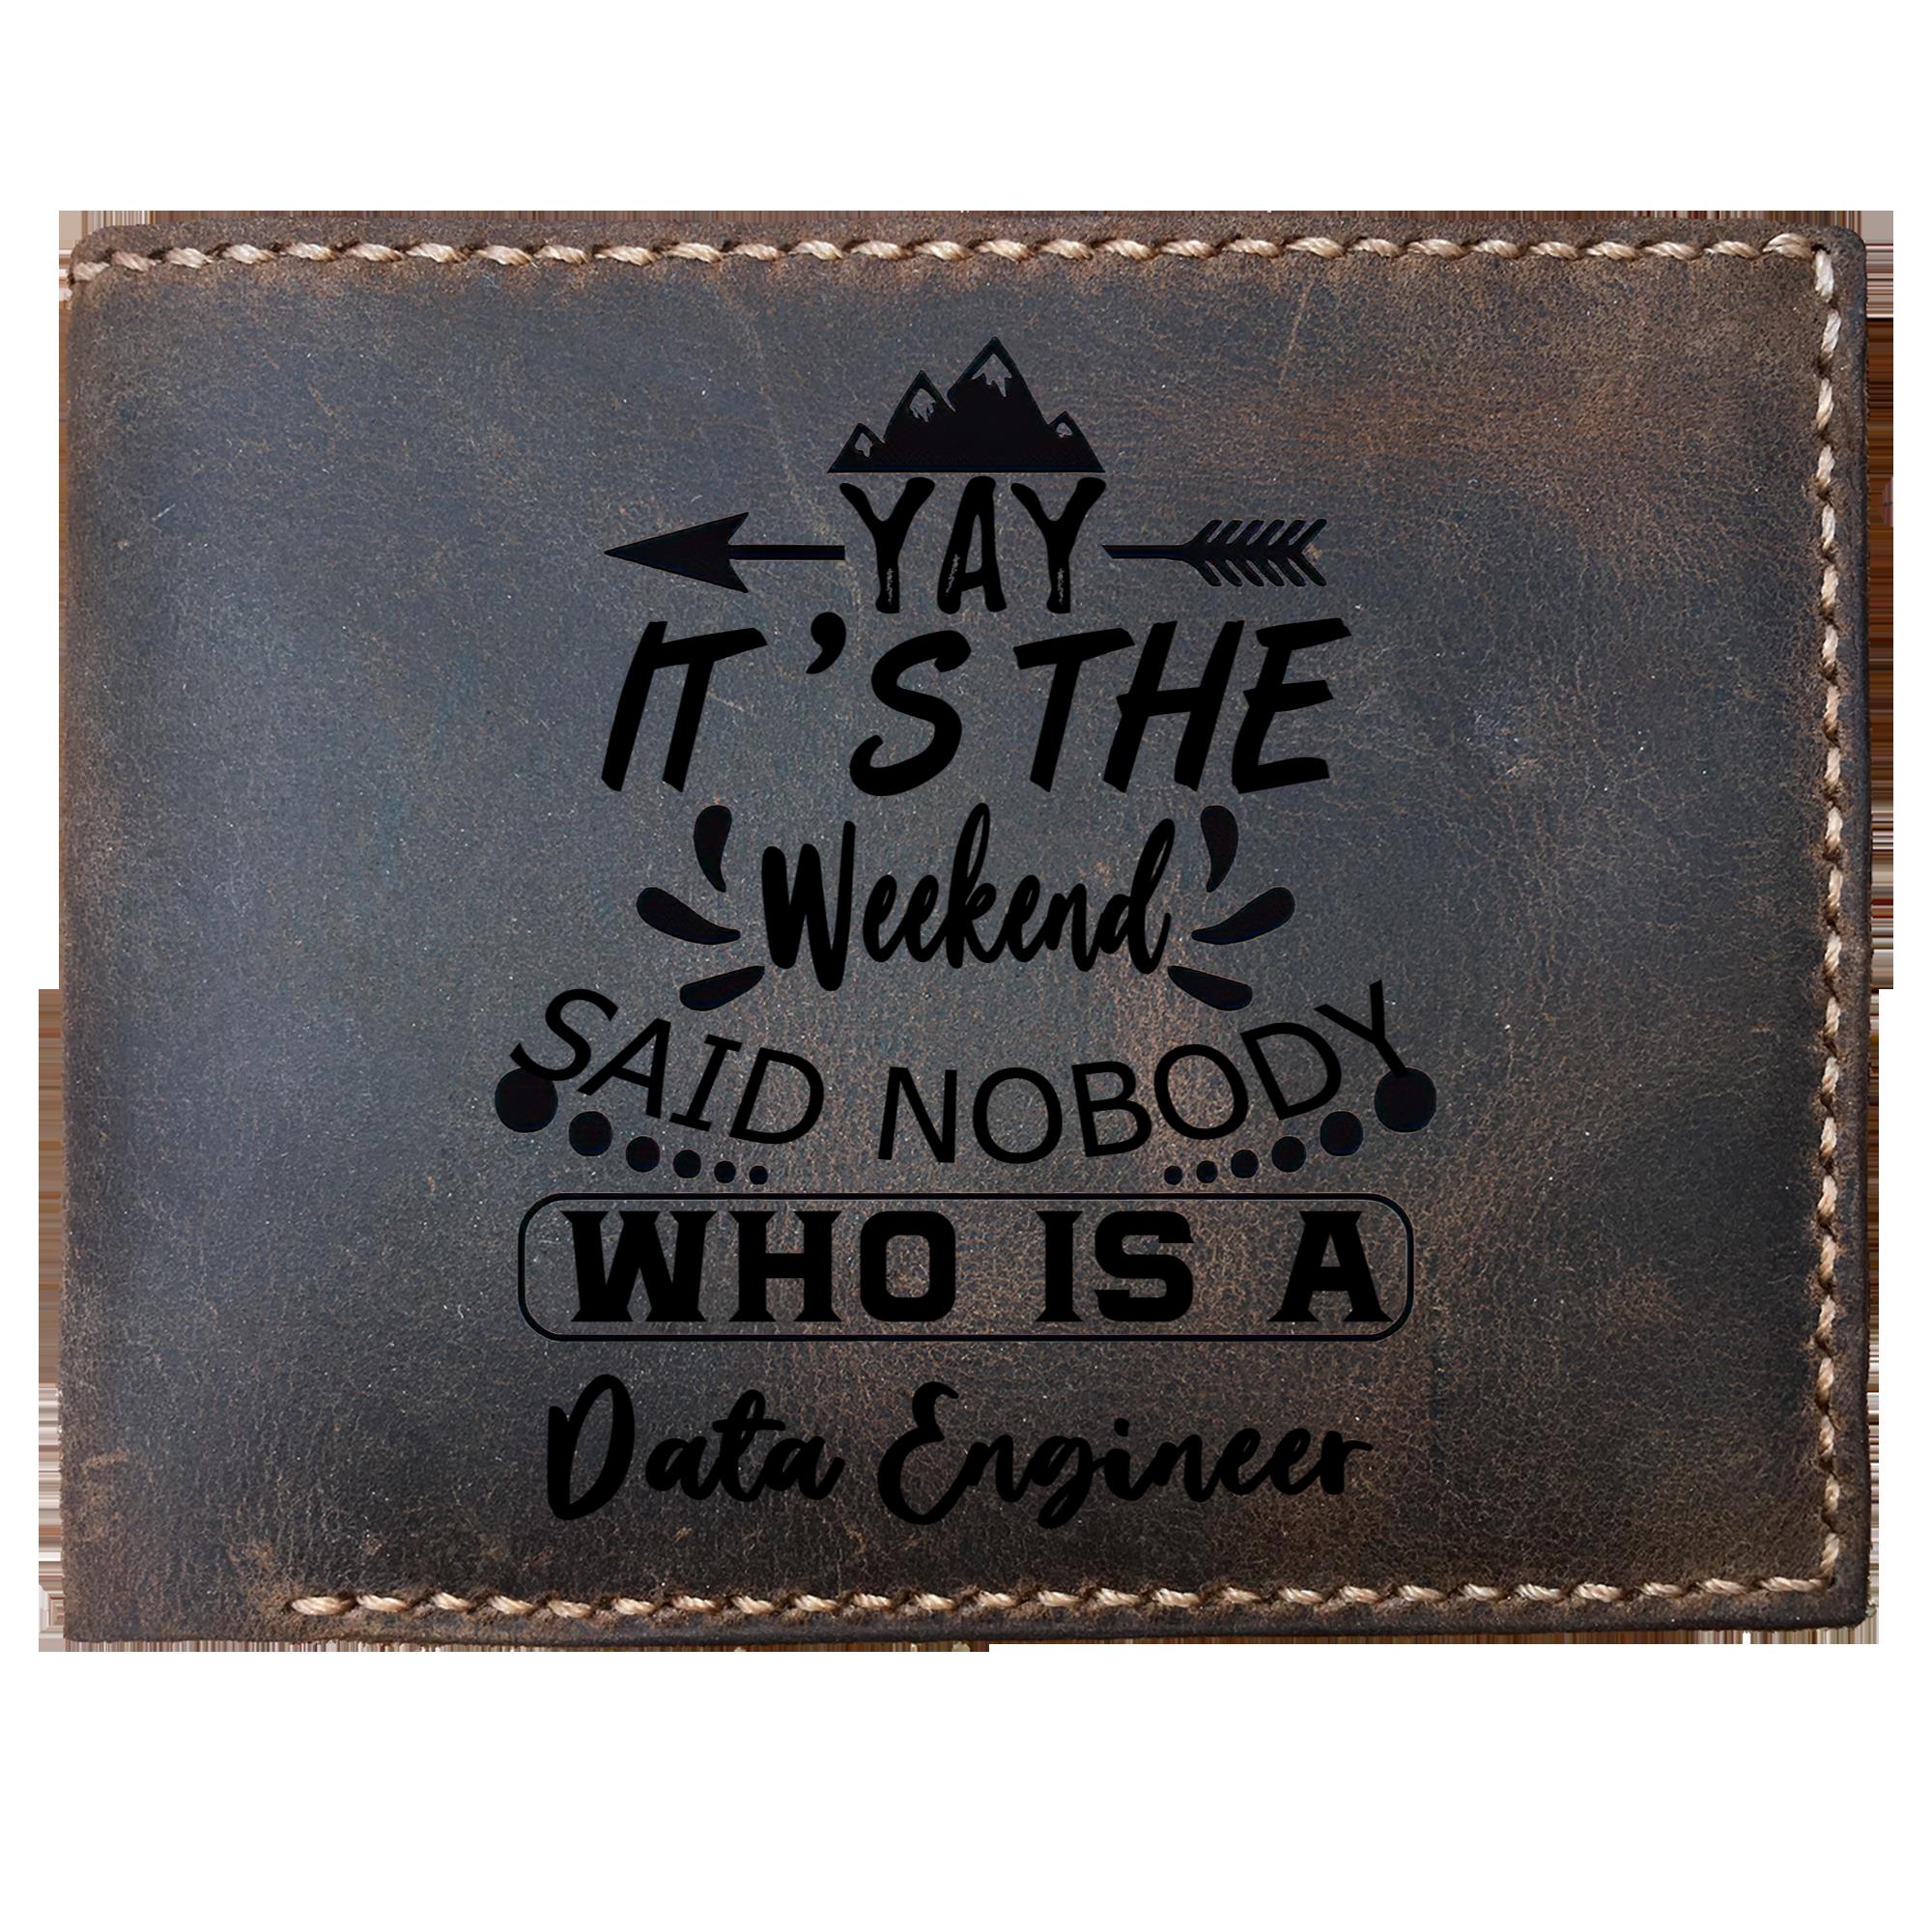 Skitongifts Funny Custom Laser Engraved Bifold Leather Wallet For Men, It's The Weekend Said Nobody Who Is A Data Engineer, Father's Day Gifts